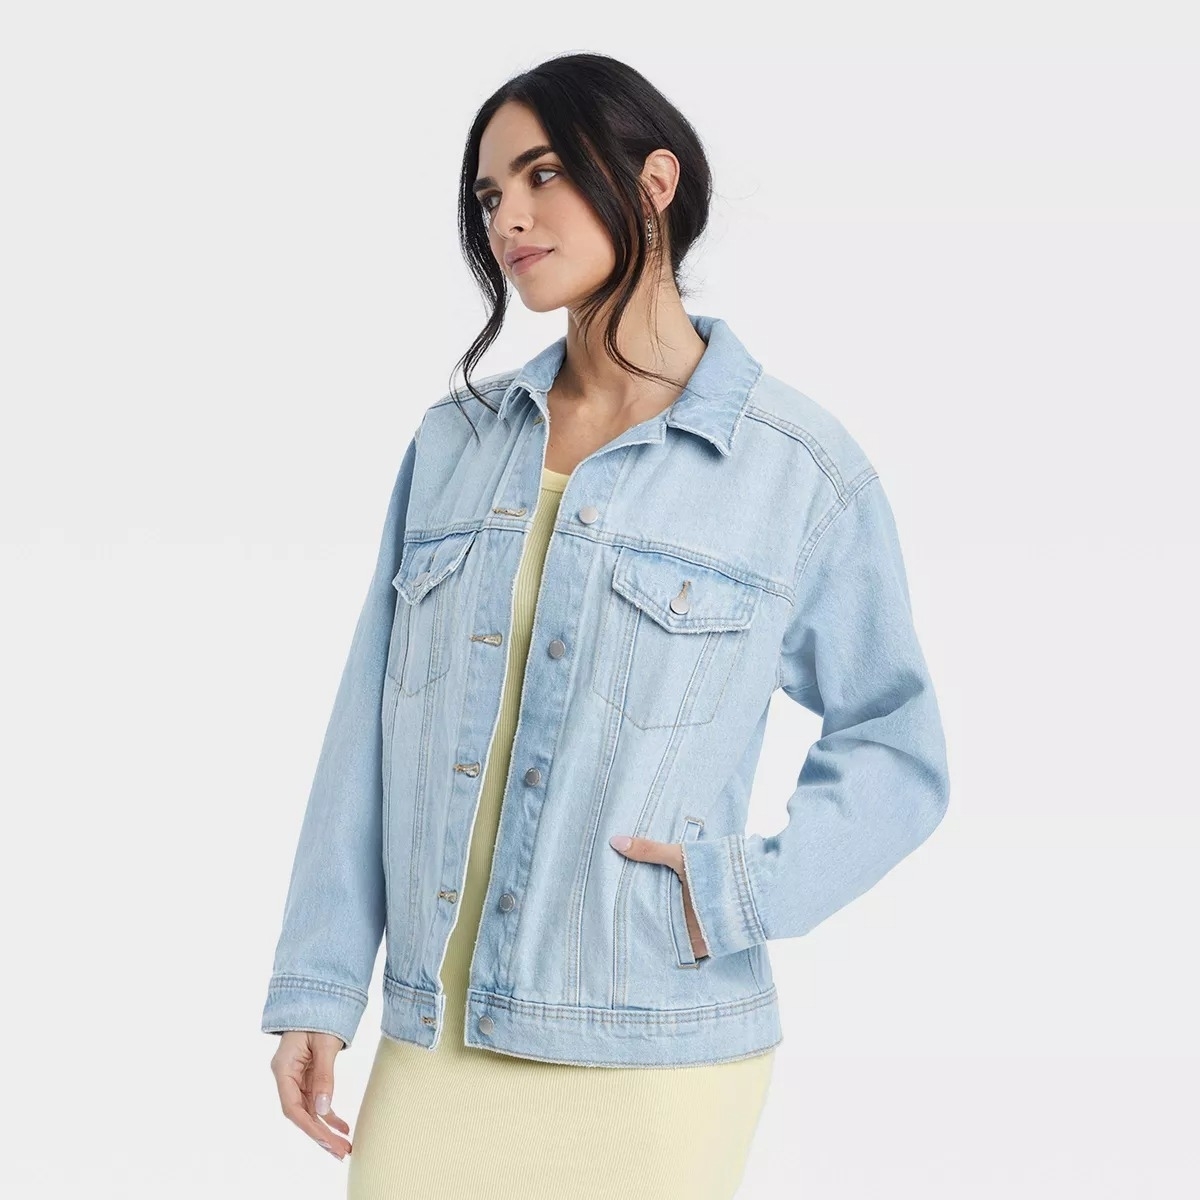 A model in a denim jacket over a yellow top,